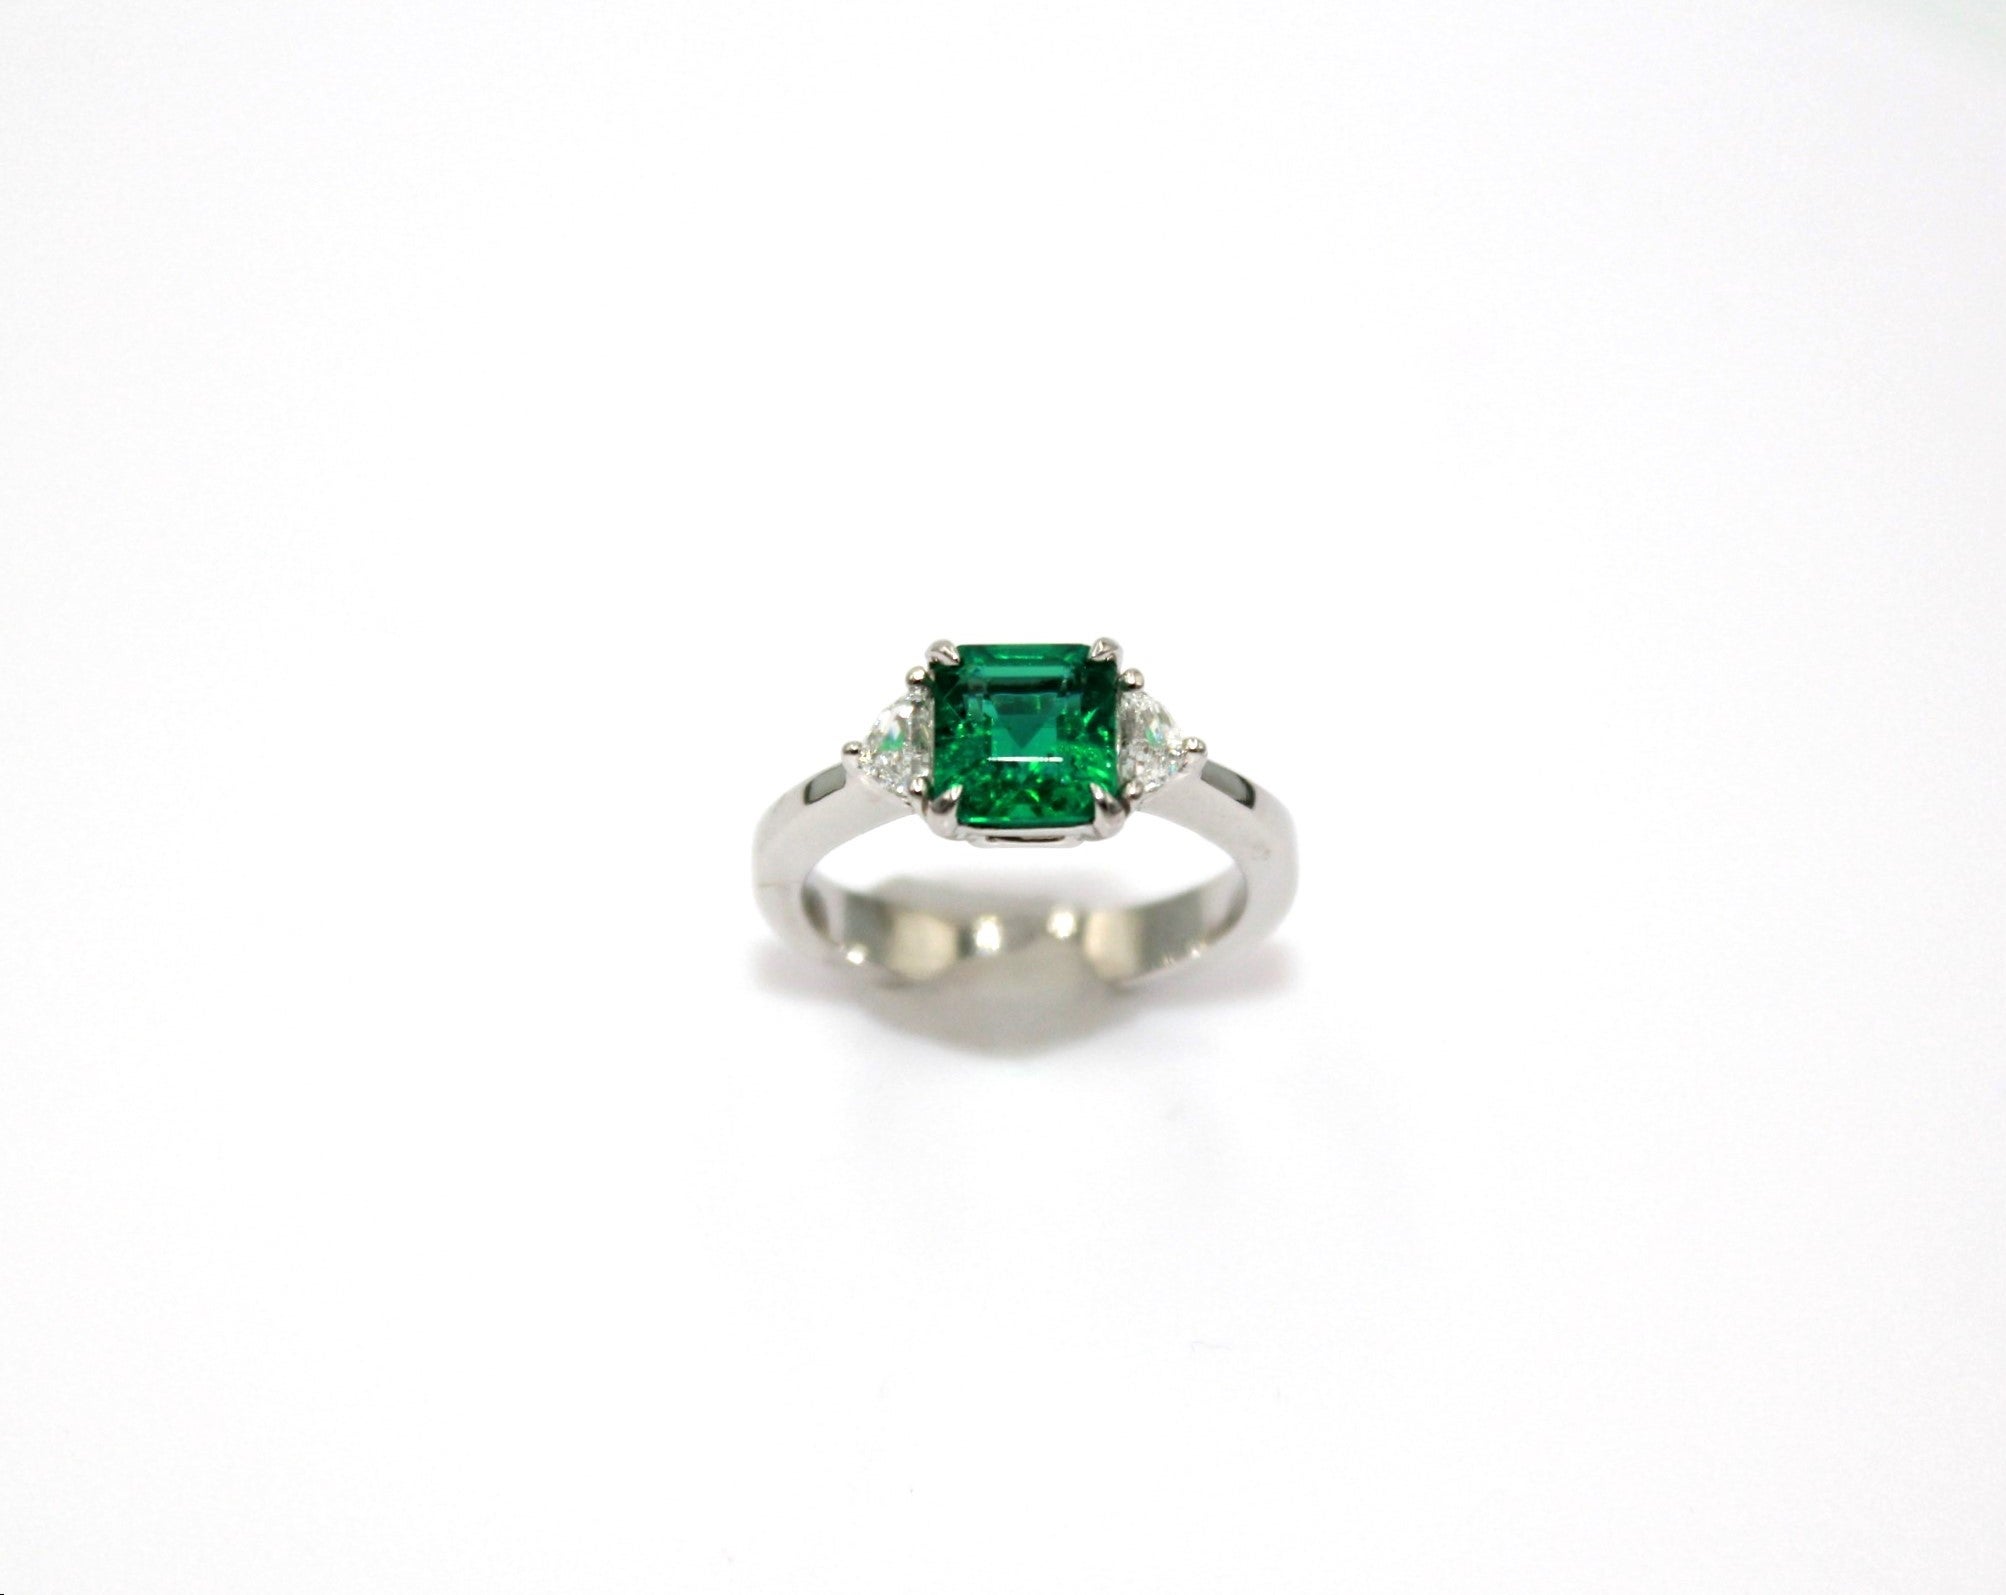 Three-stone ring with 1.32 carats Emerald-cut Zambian Emerald with paired Cadillac shape diamonds on both sides, totaling a diamond weight of 0.25 carat. 

This stunning Emerald Diamond Ring will highlight your elegance and uniqueness. 

Item